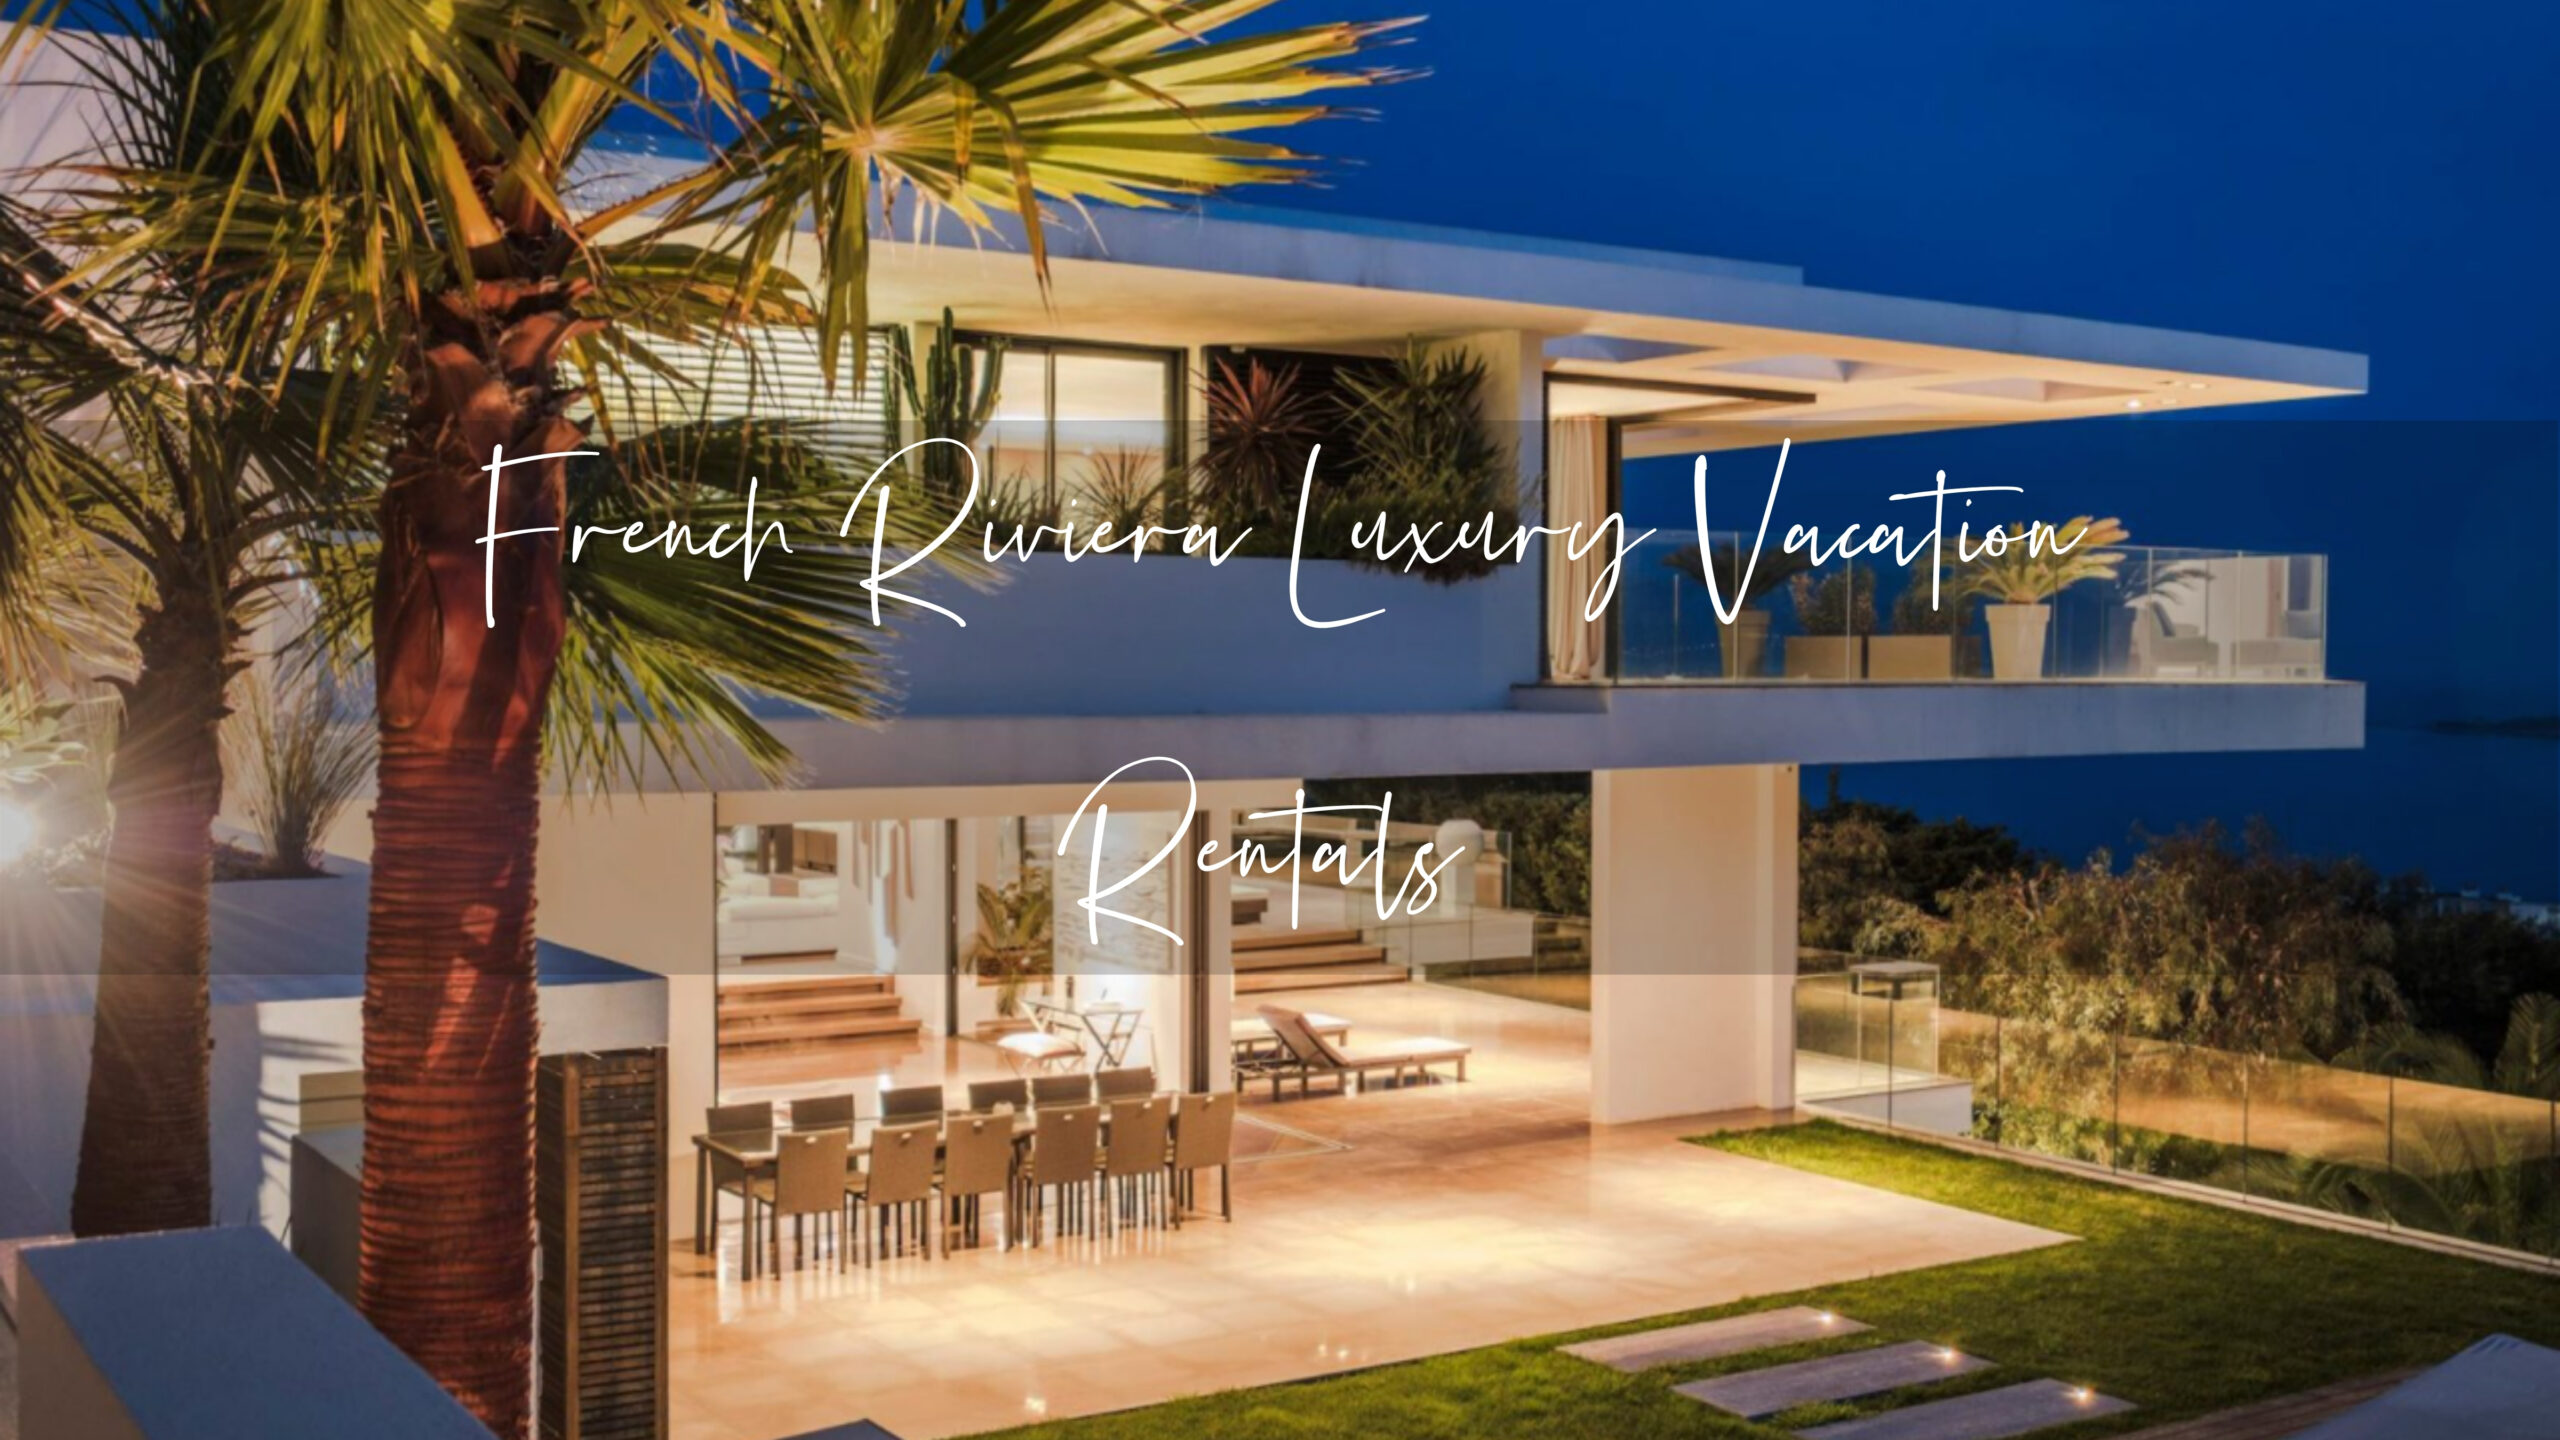 Top-Rated French Riviera Luxury Vacation Rentals